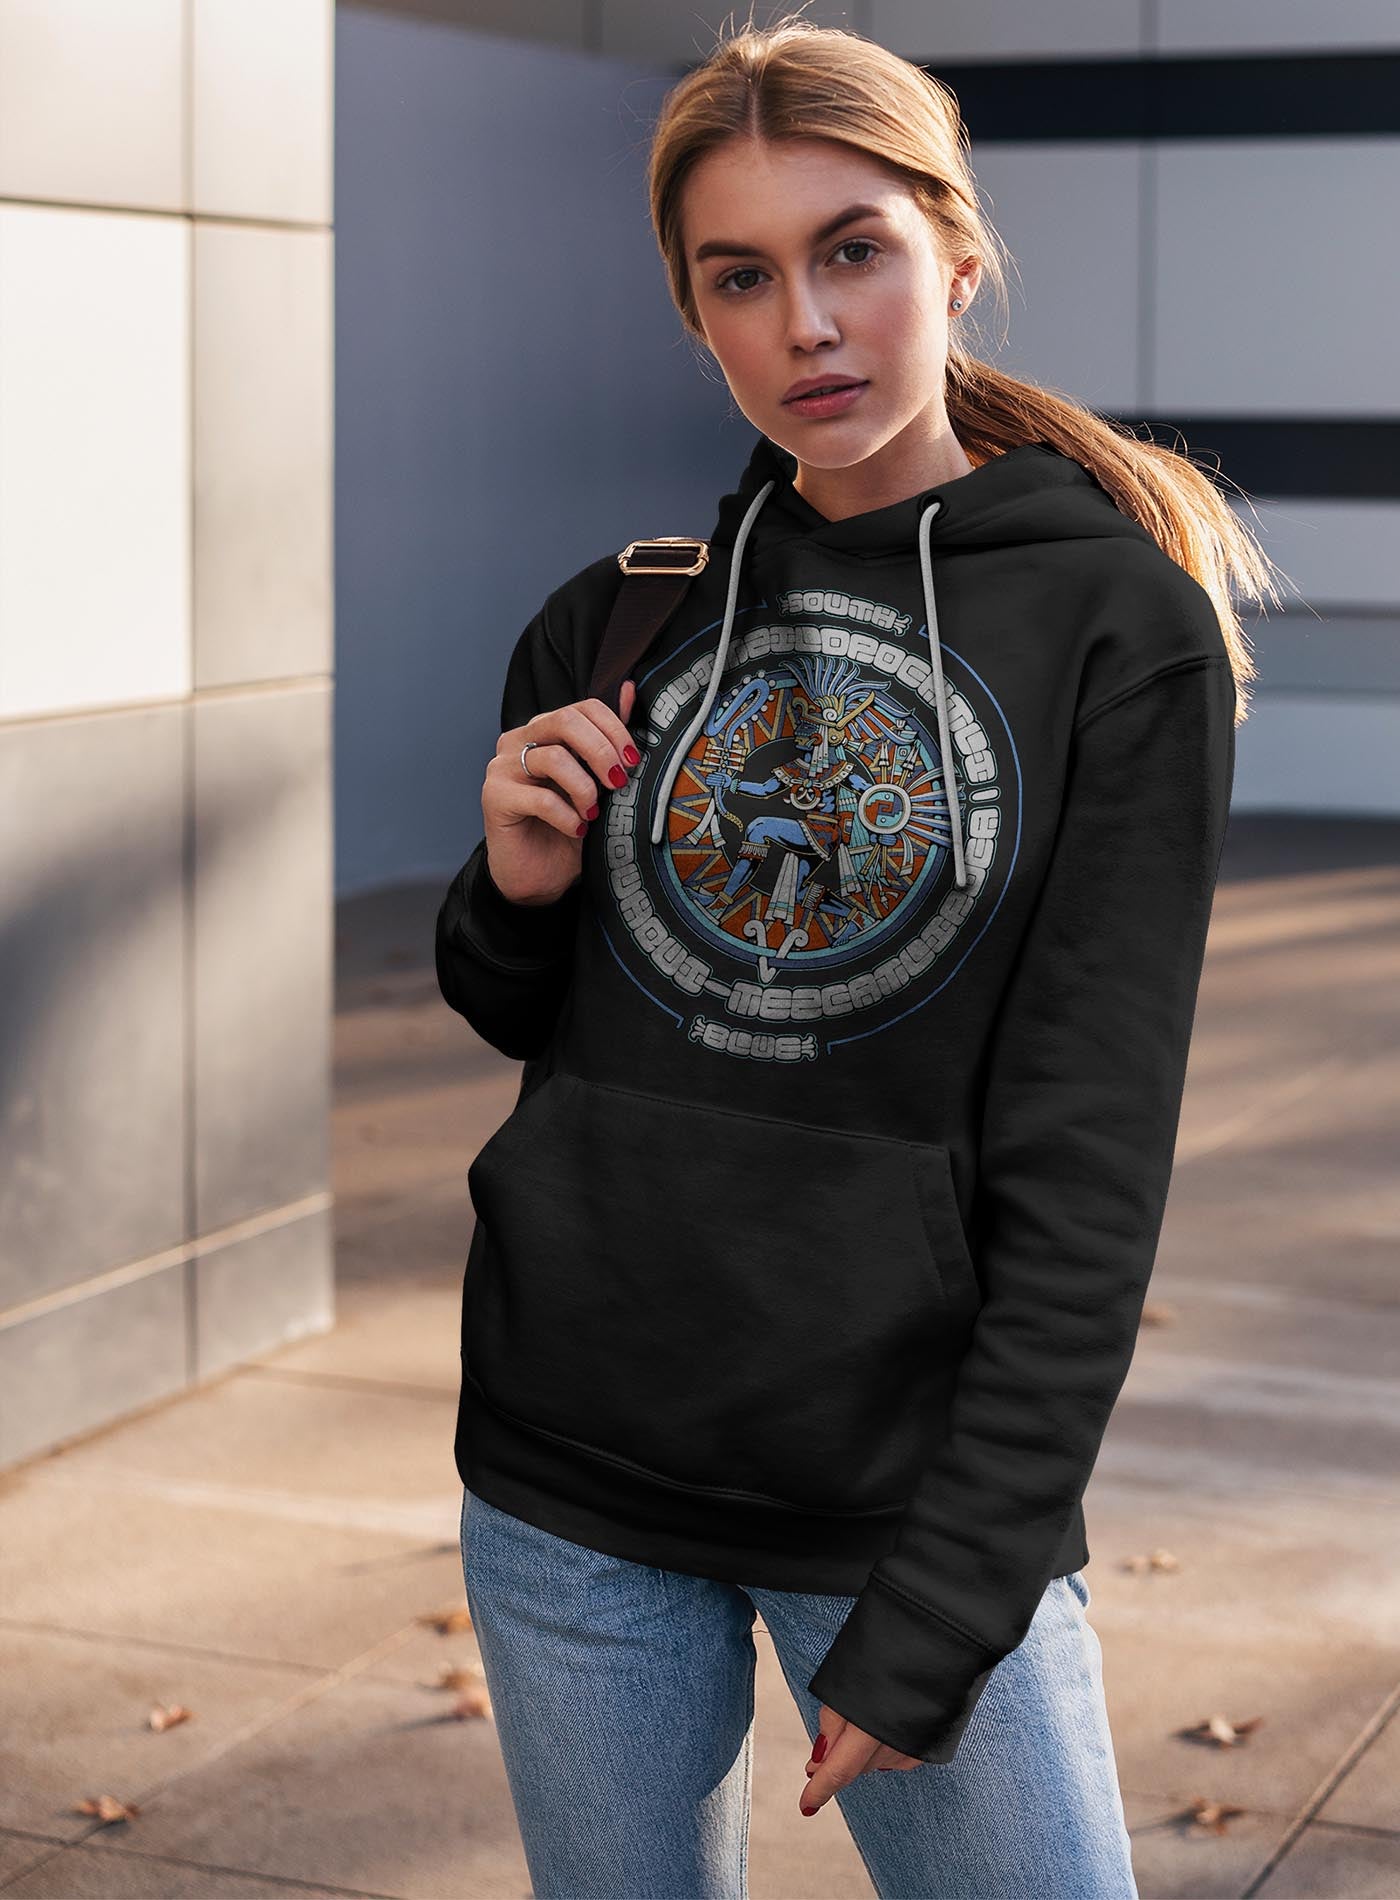 man modeling a black unisex hoodie featuring a front print of the toltec-aztec god Tezcatlipoca also known as Huitzilopochtli. Reinterpretation by Mexican illustrator G.M. Meave.